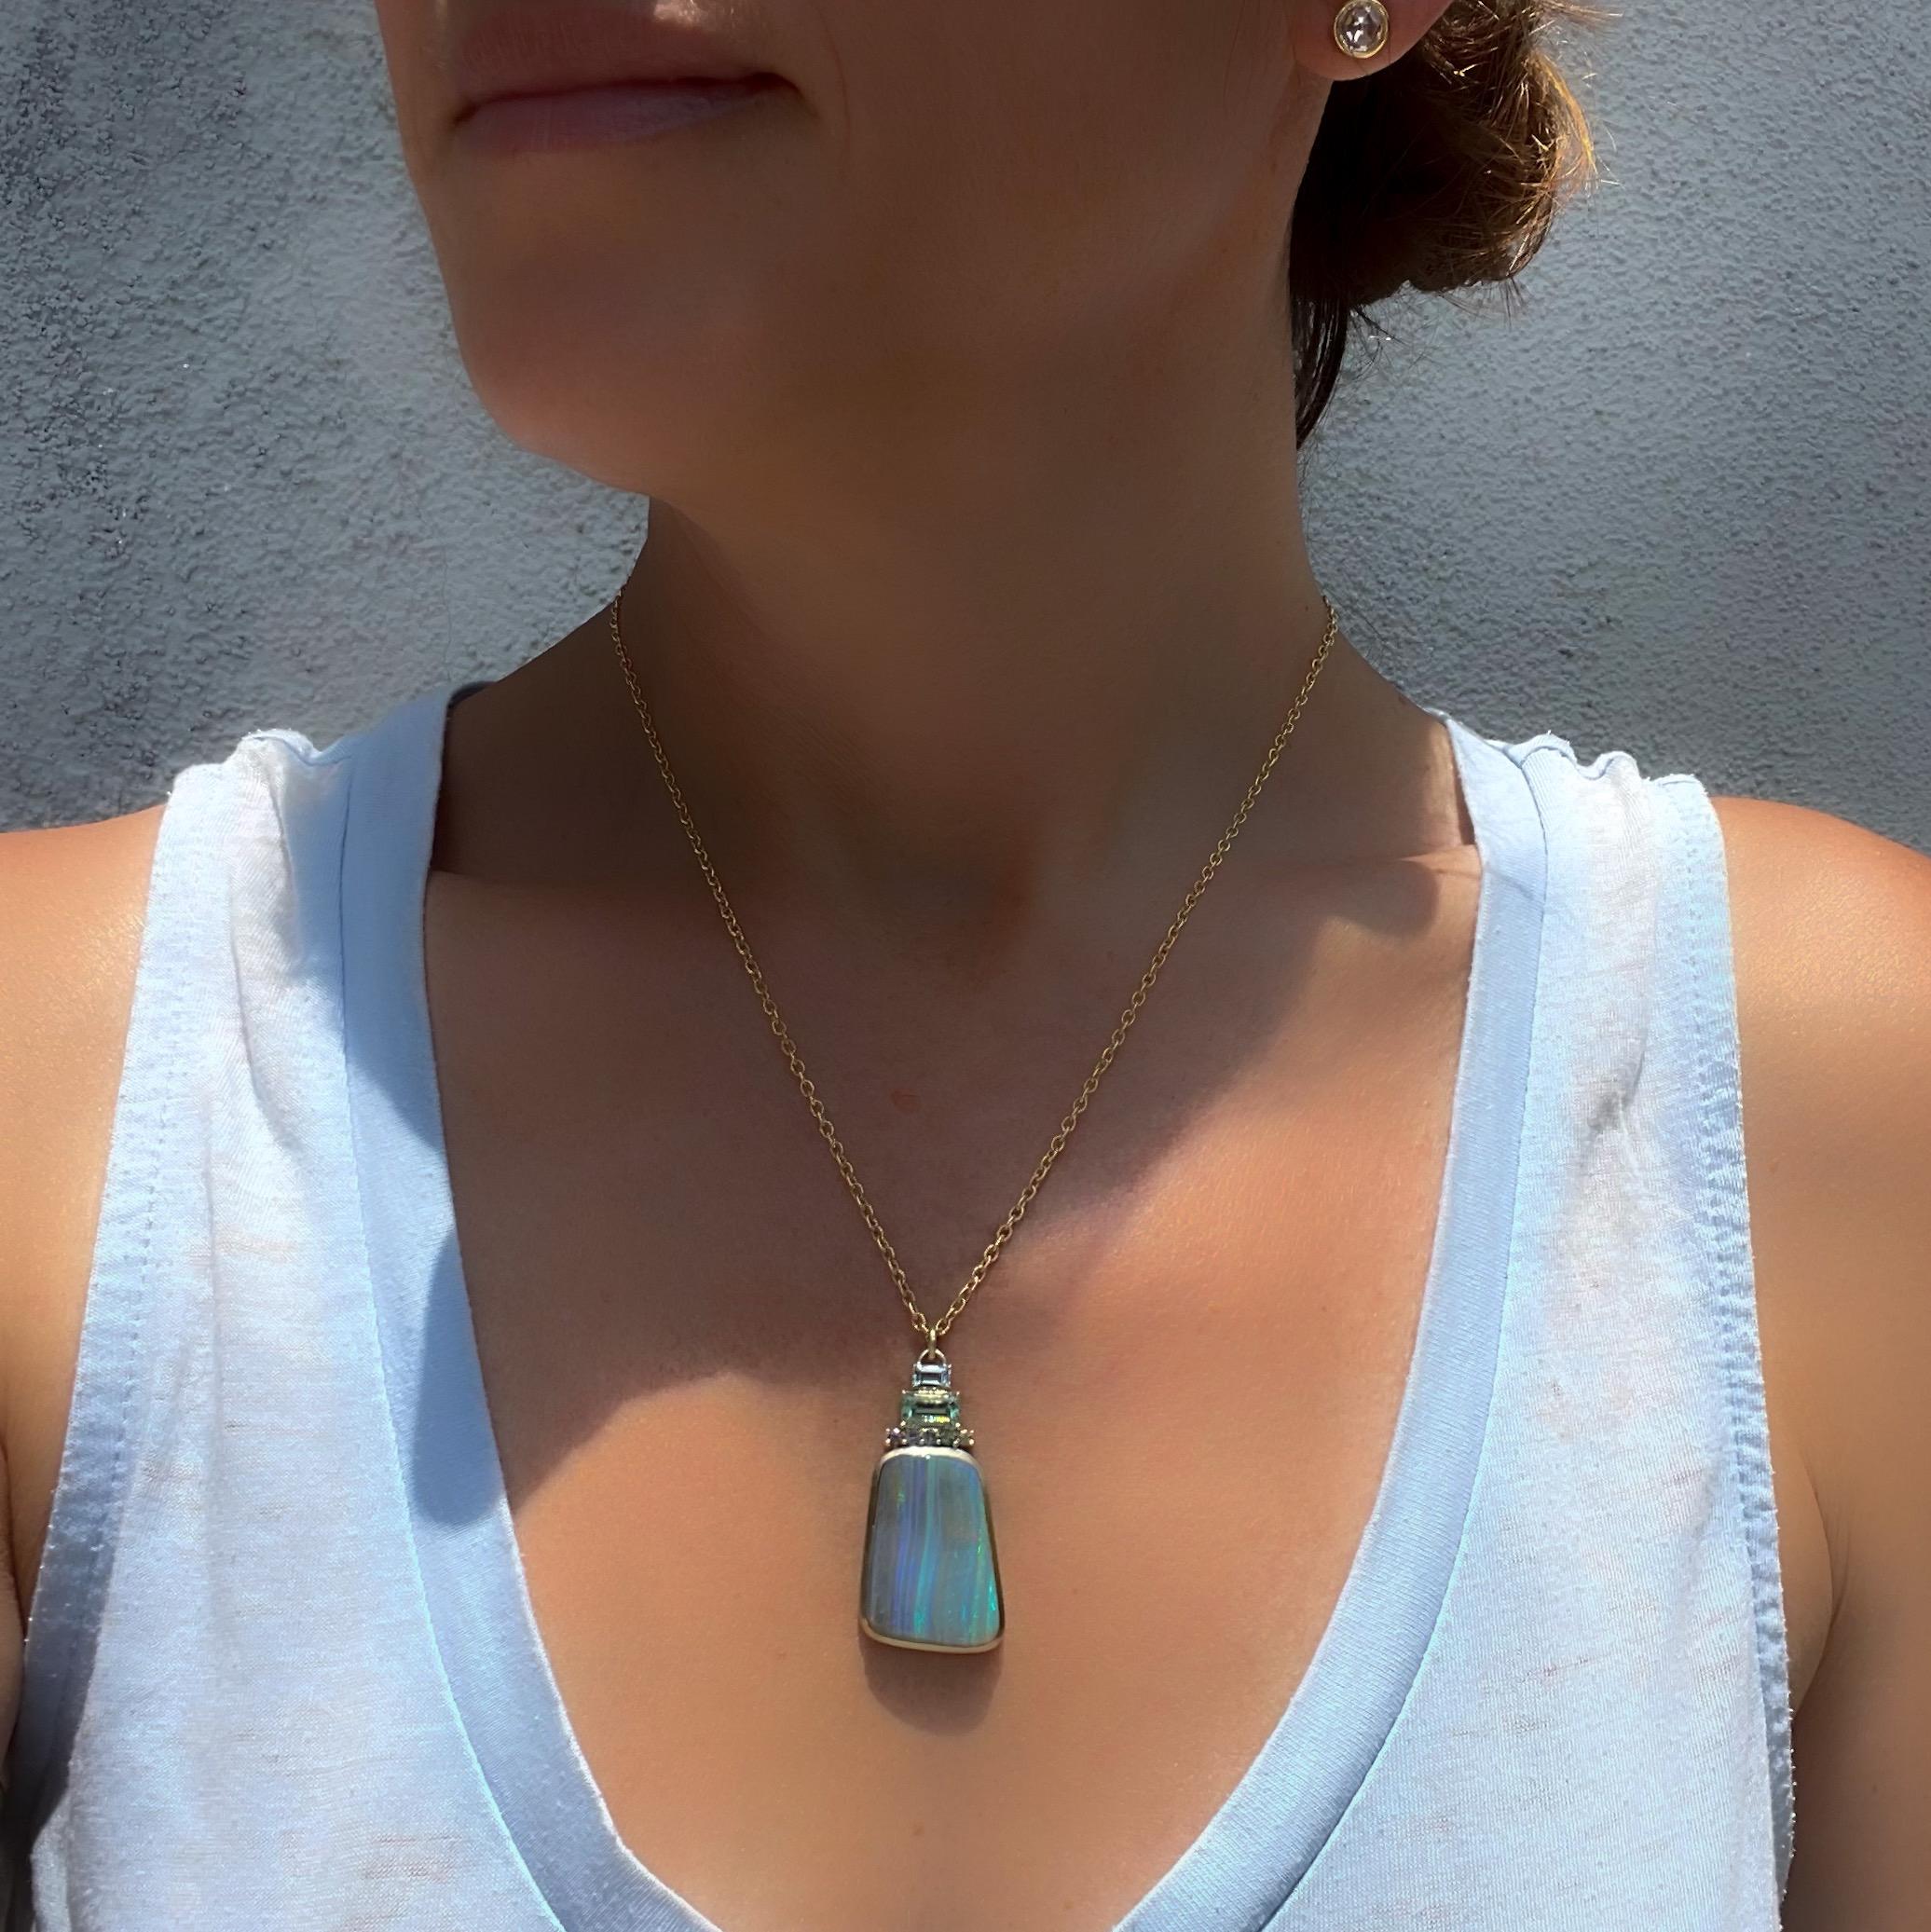 NIXIN Jewelry Eucalyptus Melody Australian Opal Necklace with Emerald and Gold For Sale 3